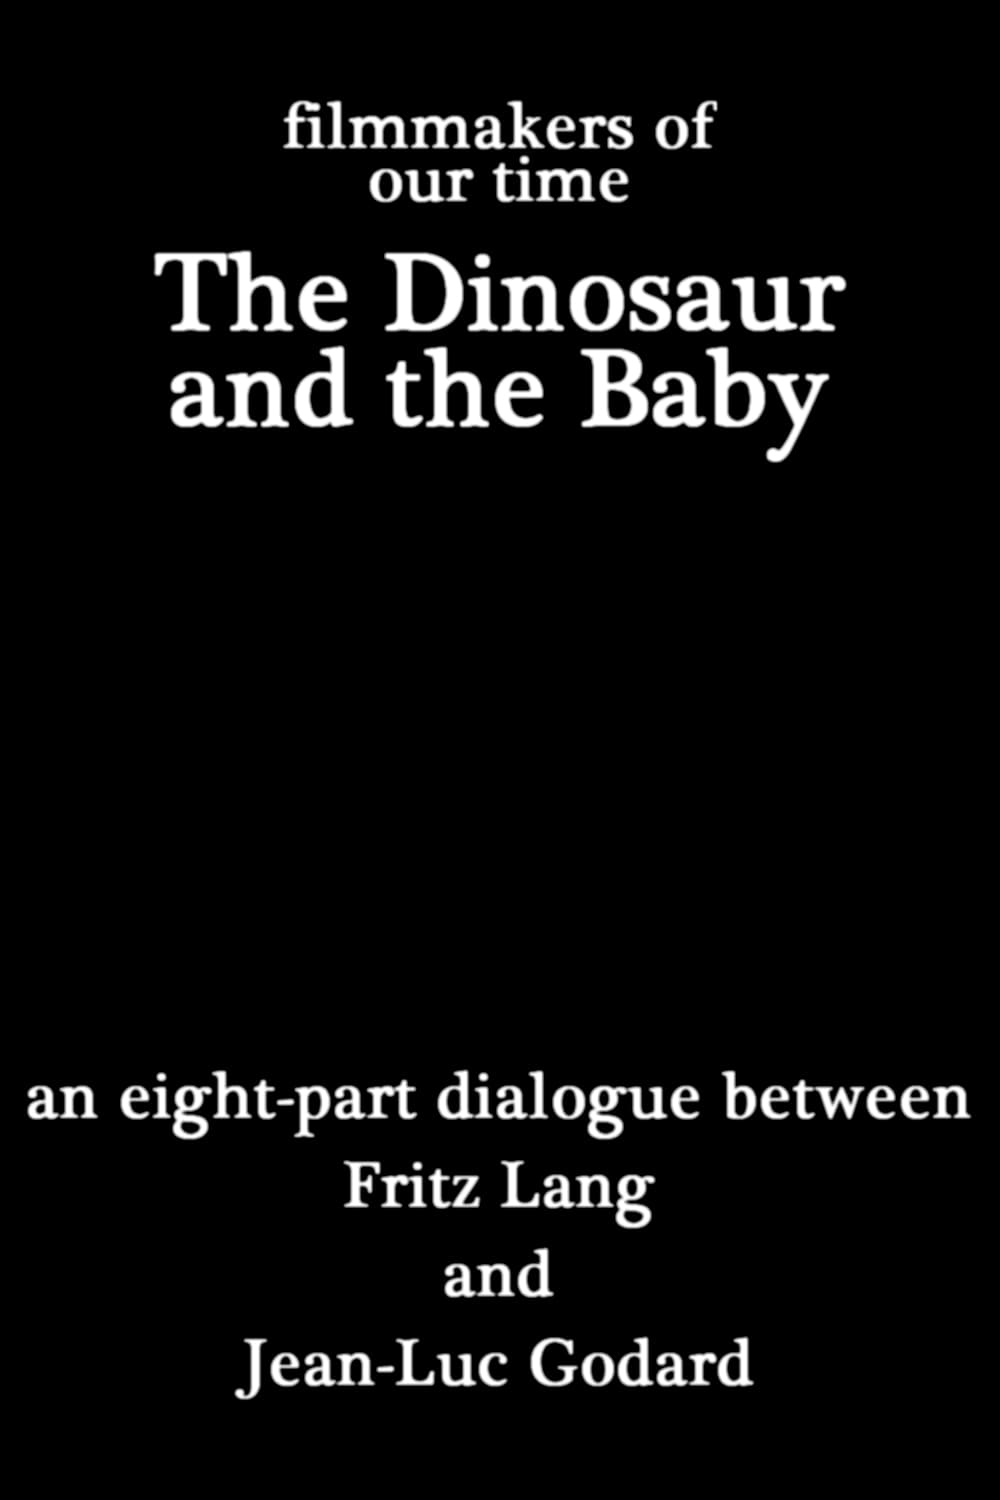 The Dinosaur and the Baby (1967)